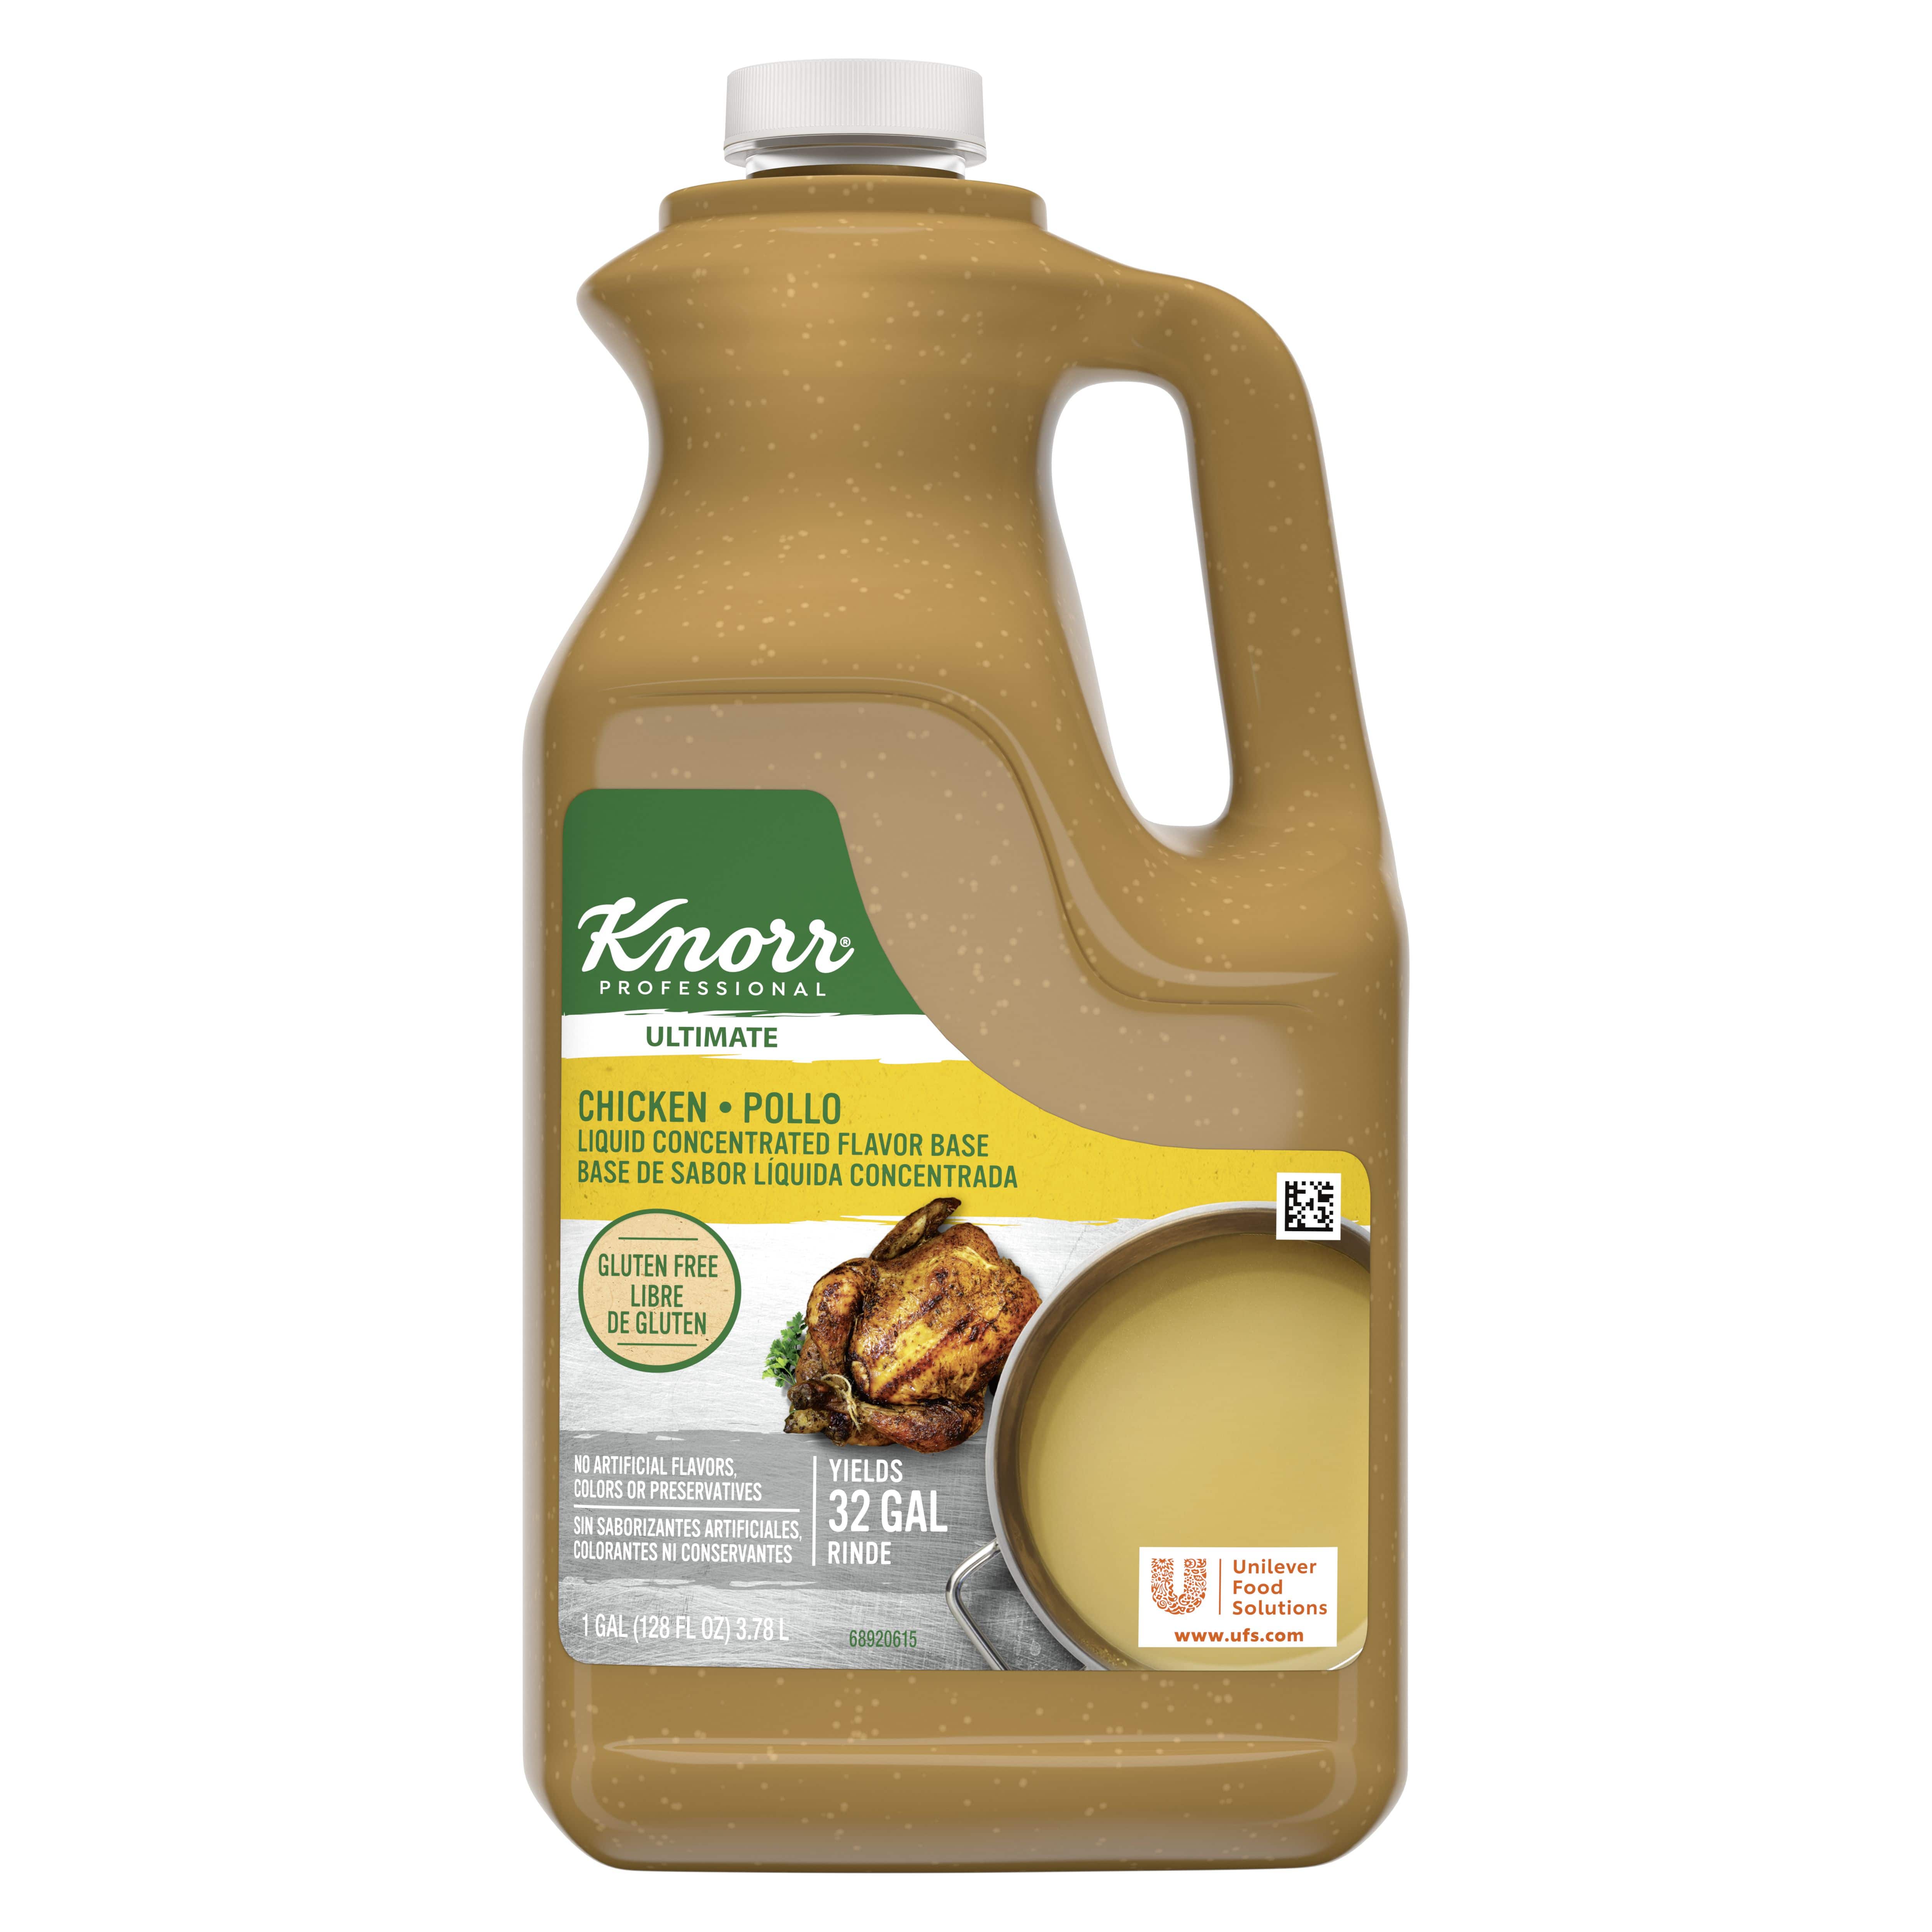 Knorr Professional Liquid Concentrated Chicken Base 2 x 1 GAL - 